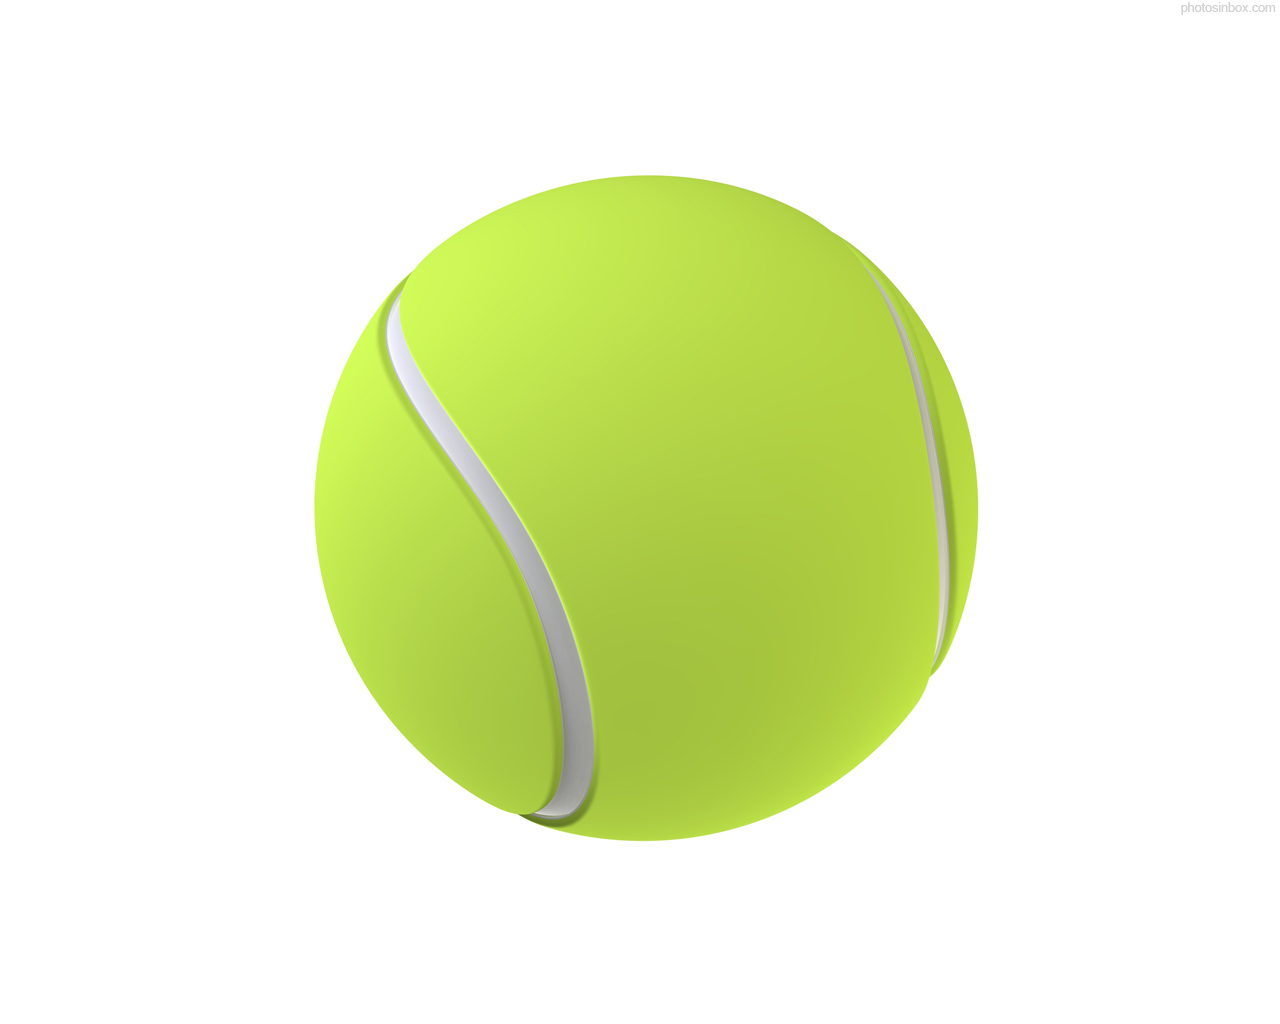 Tennis ball picture clipart